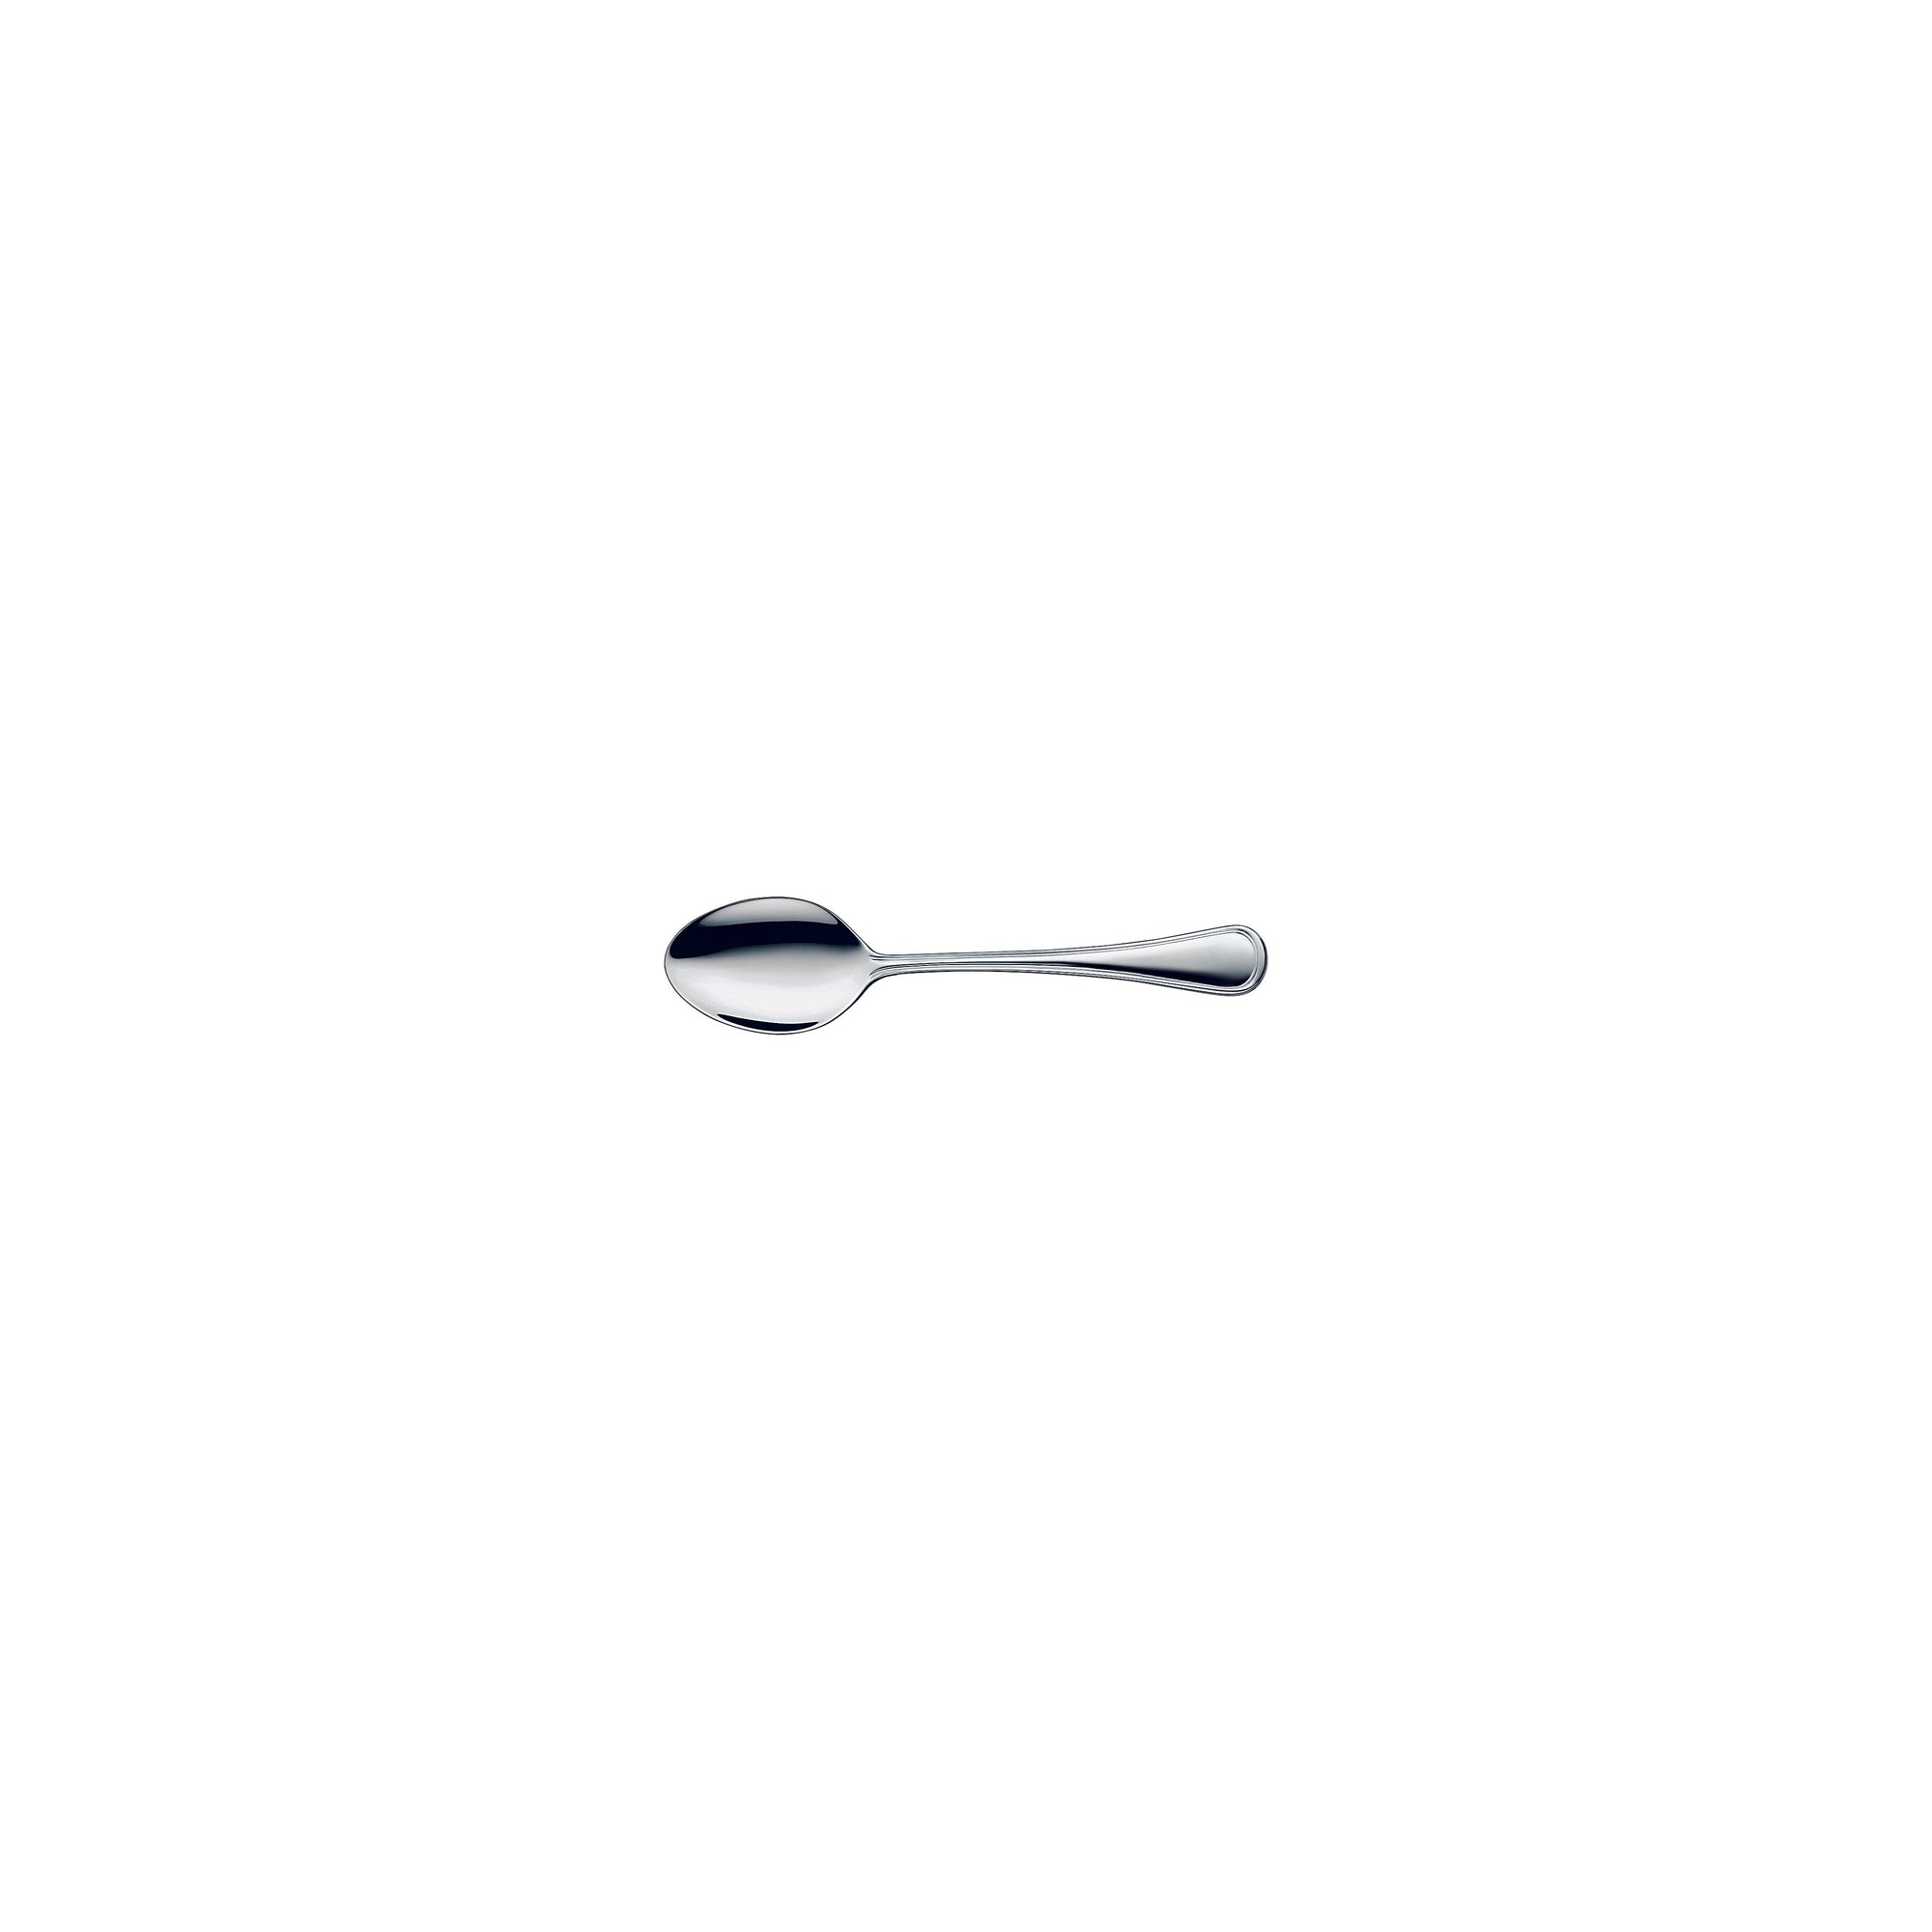 Contour Coffee Spoon Stainless Steel